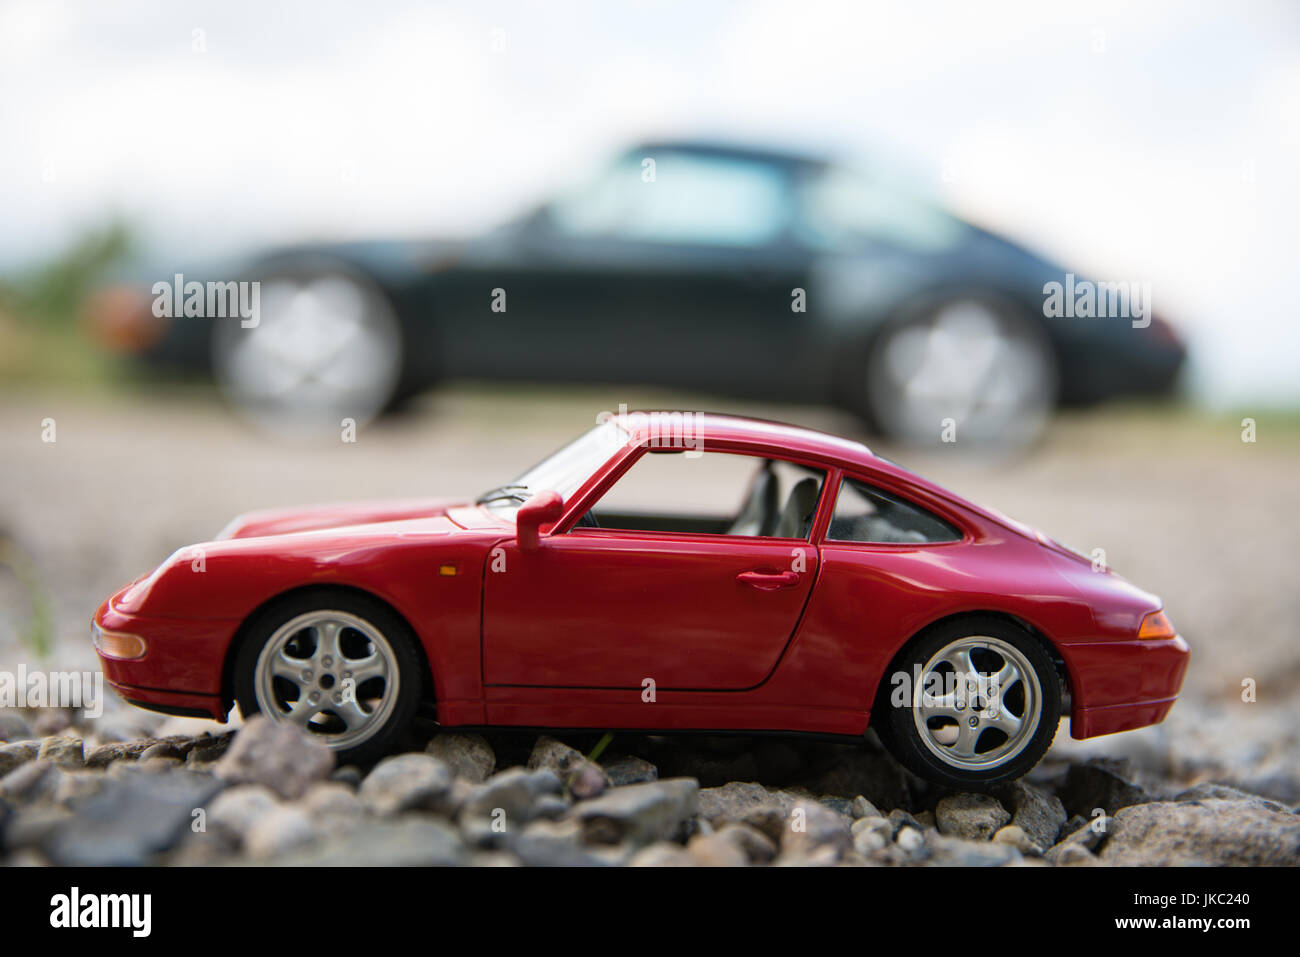 Oldtimer Porsche High Resolution Stock Photography and Images - Alamy